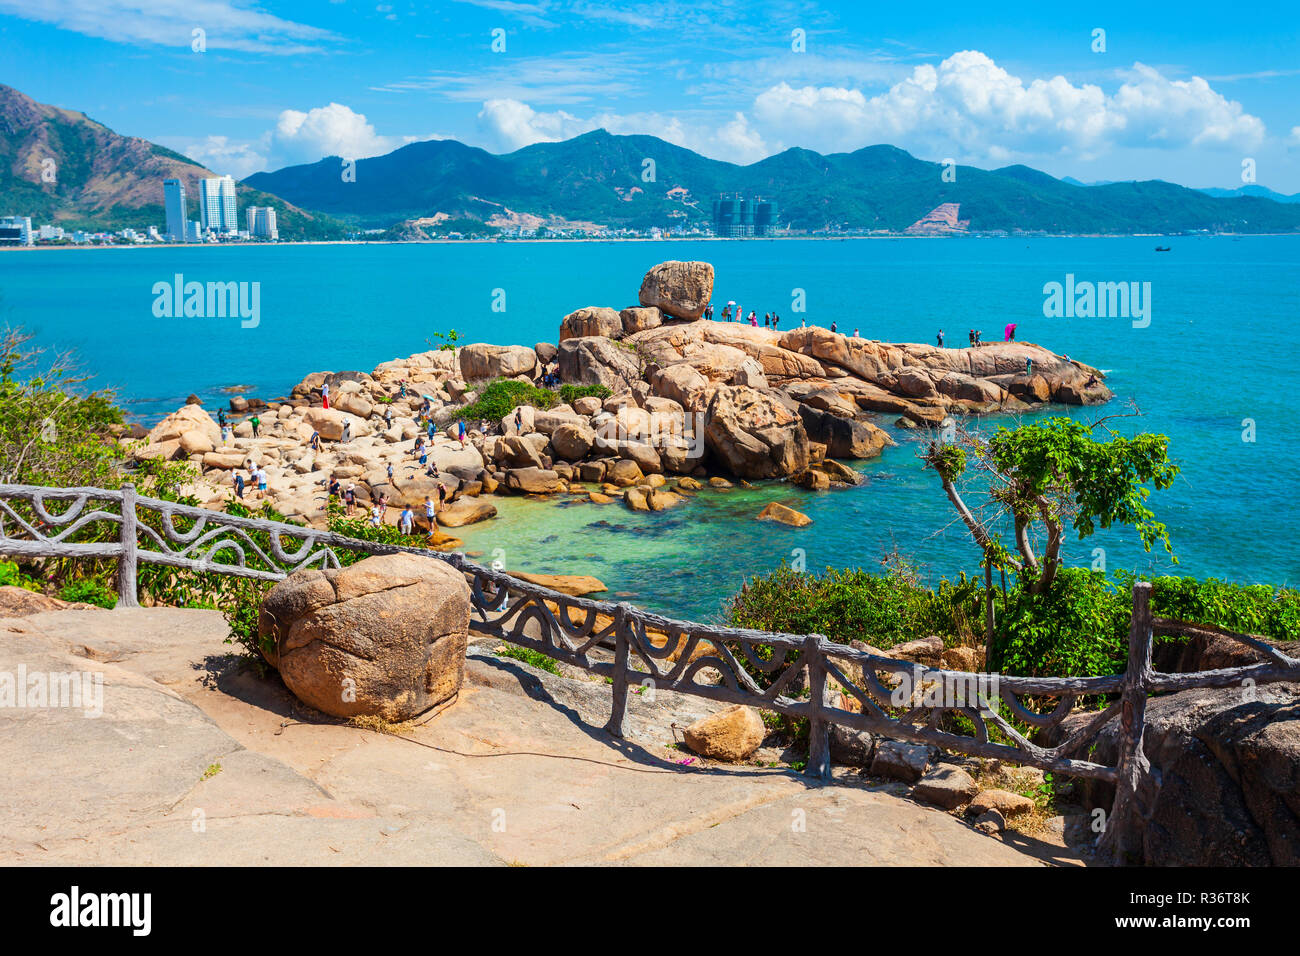 Hon Chong cape rock garden is a popular tourist attraction in Nha Trang city in Vietnam Stock Photo